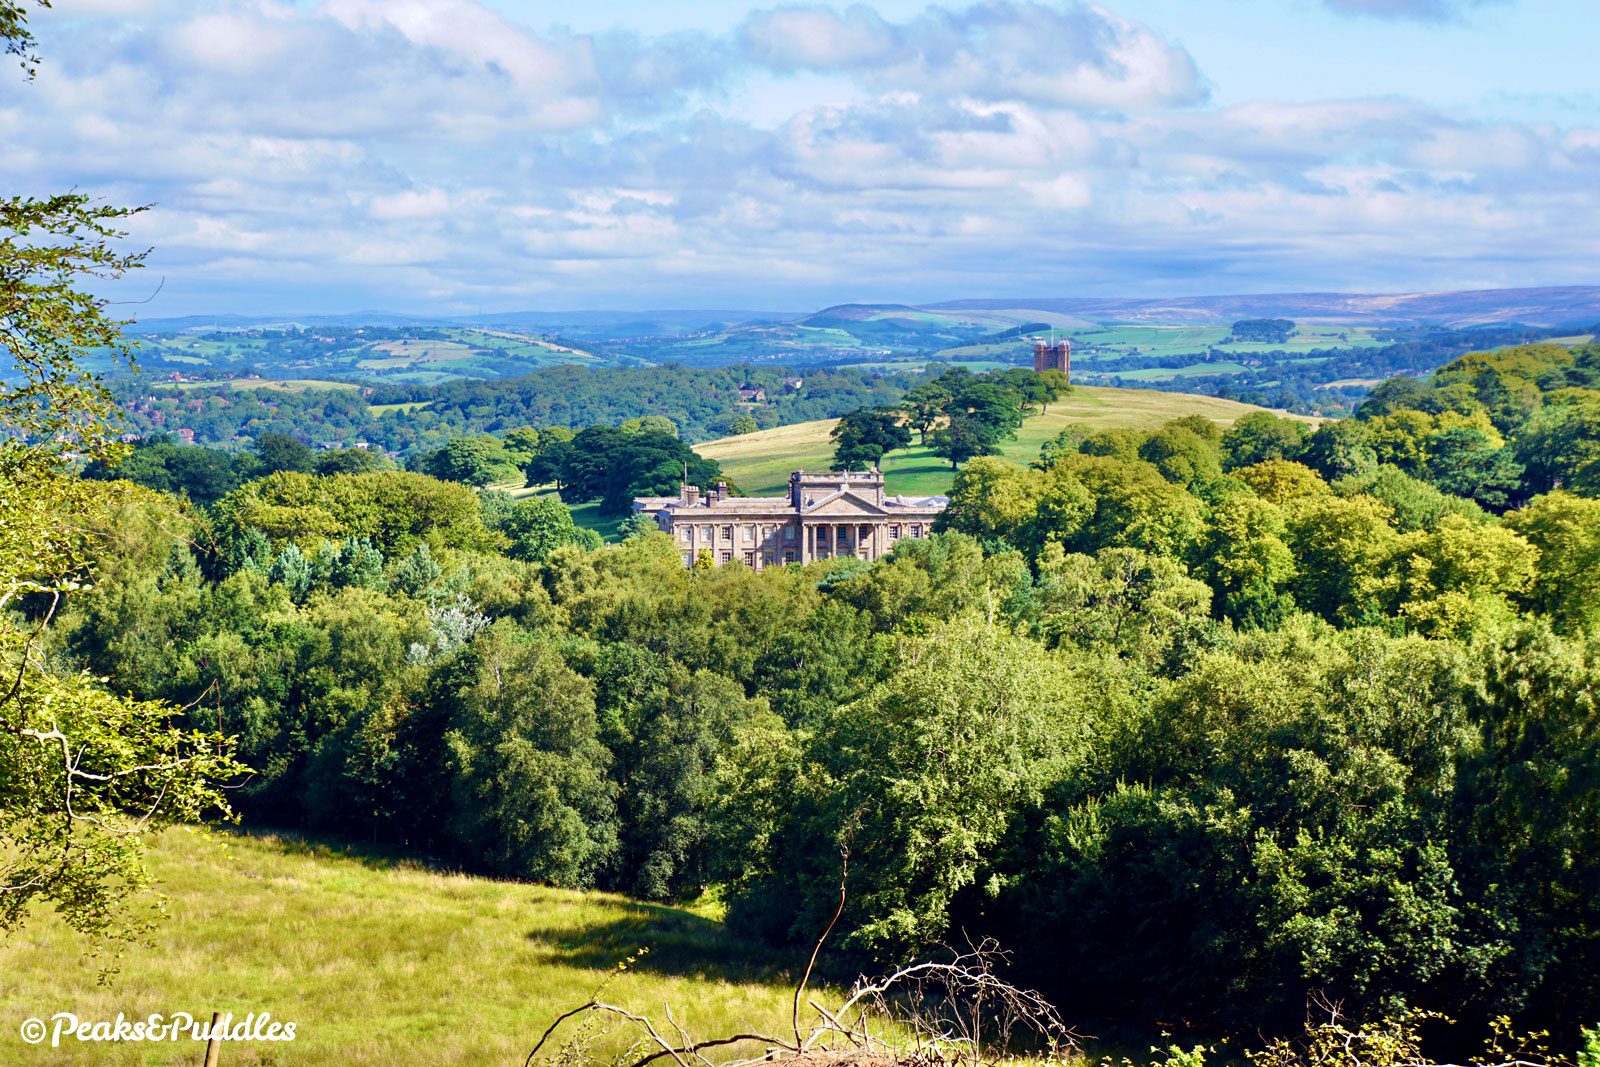 In this famous view of both Lyme Hall and The Cage, seen from the footpath through Knightslow Wood, Marple Ridge is the hill extending directly behind, to the left.